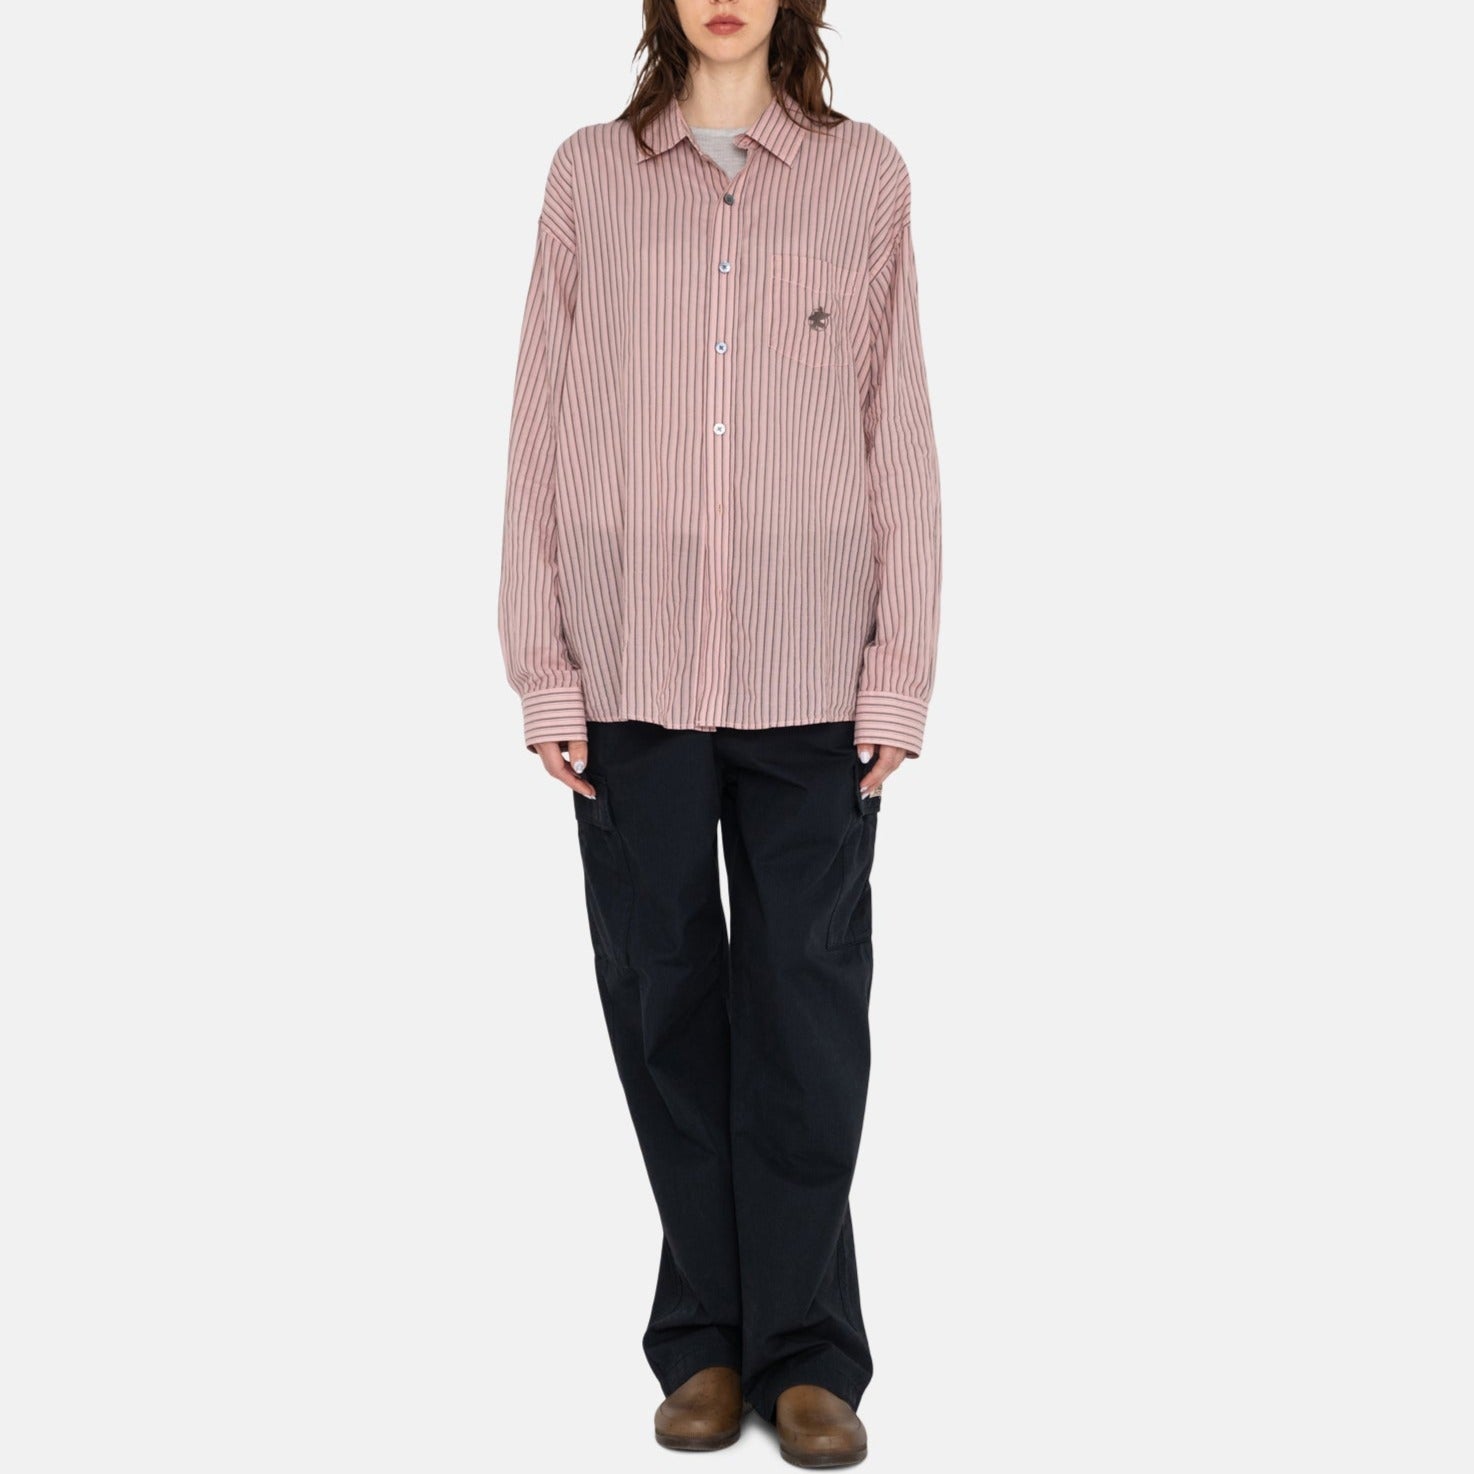 Stussy - Lightweight Classic Shirt - Brick | available at LCD